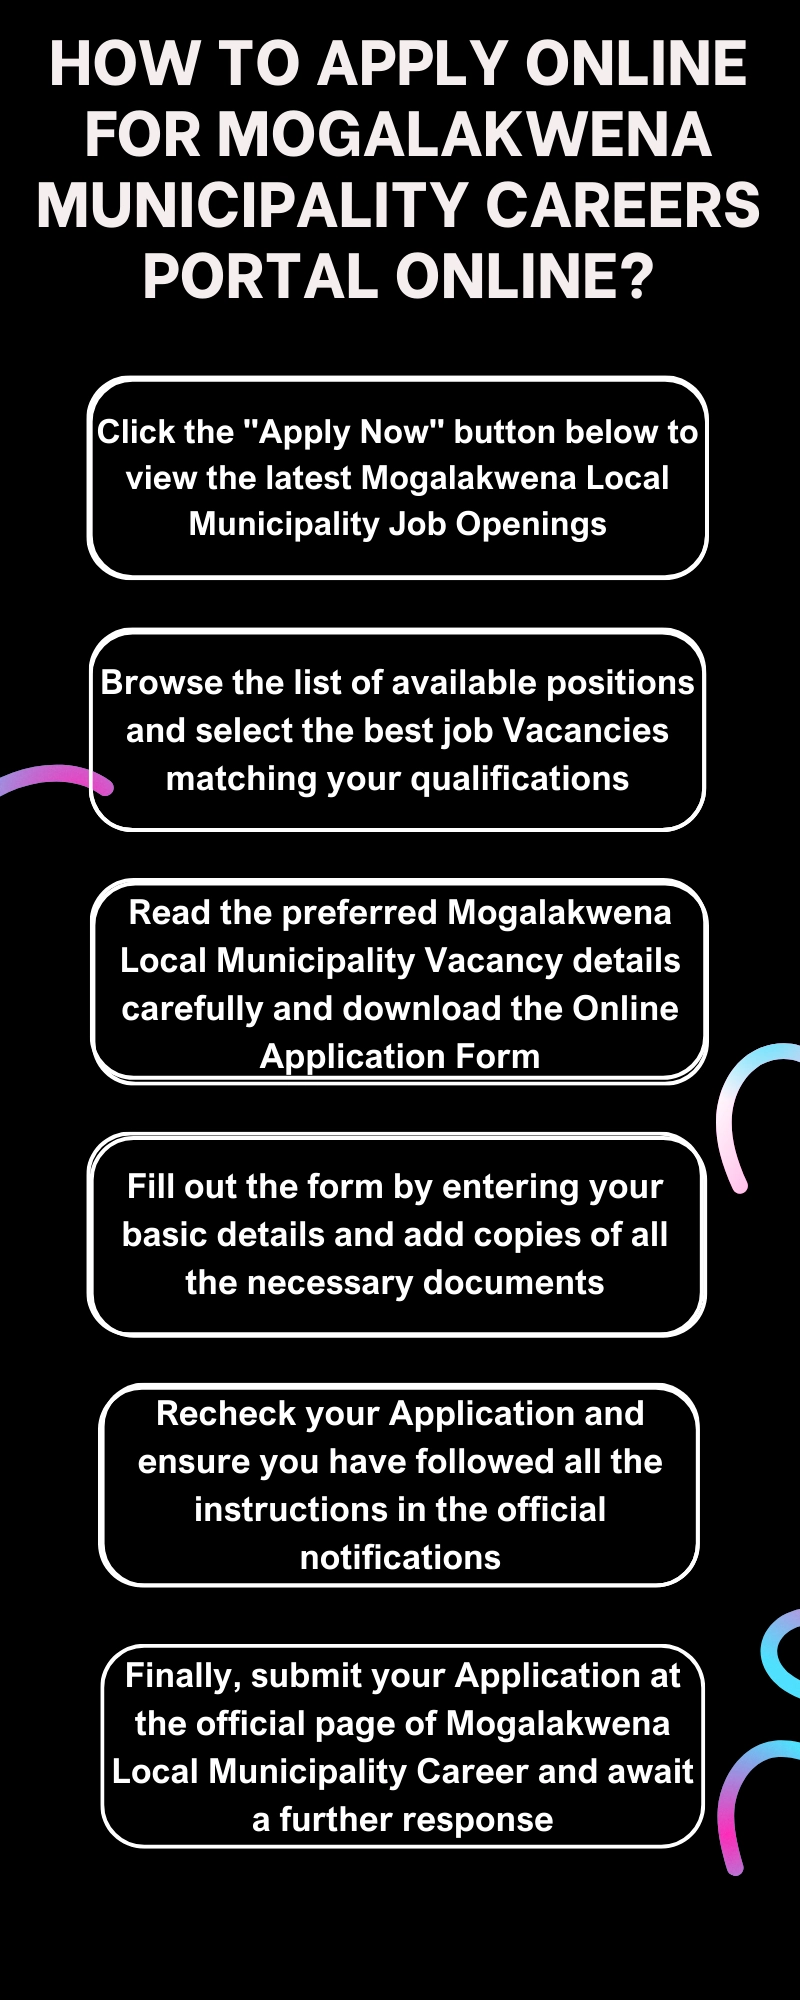 How to Apply online for Mogalakwena Municipality Careers Portal Online?